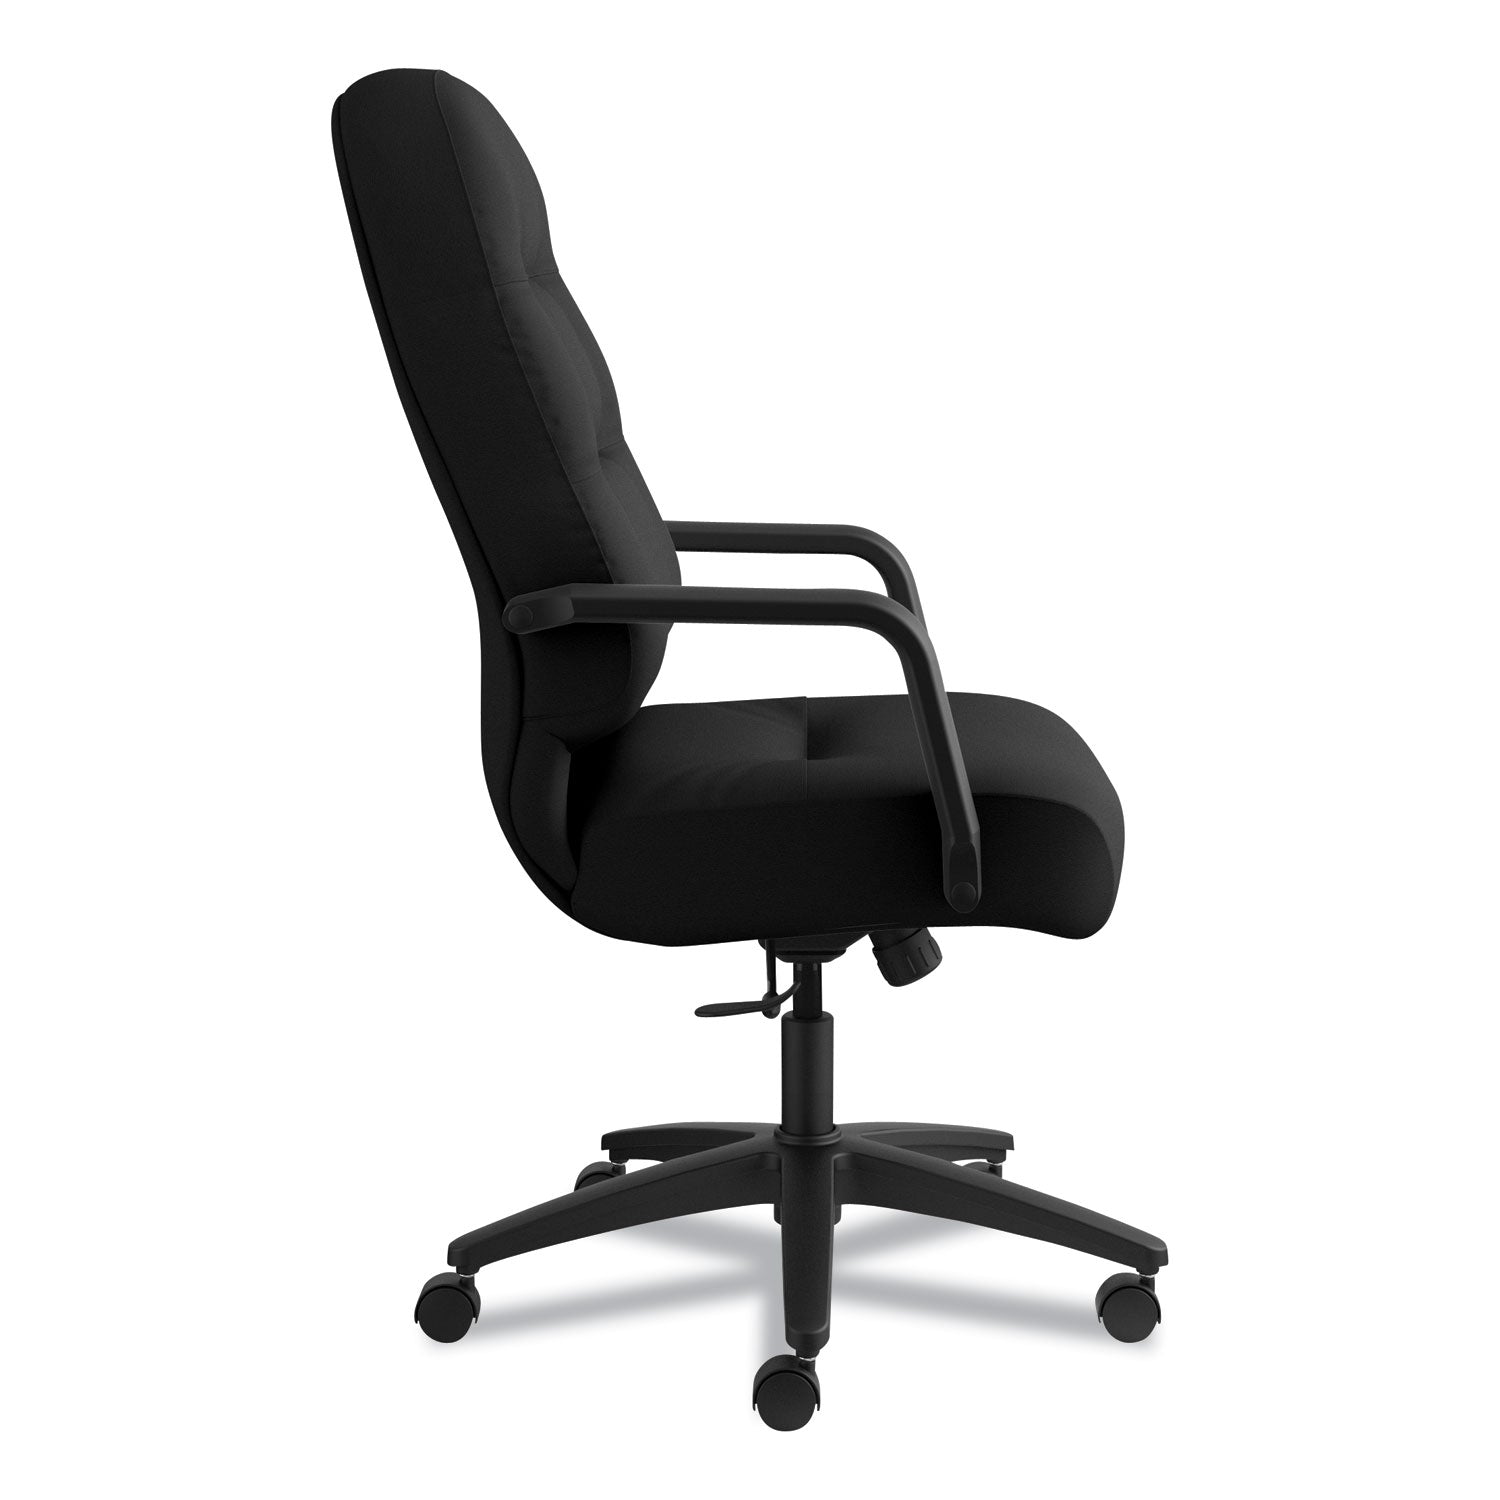 Pillow-Soft 2090 Series Executive High-Back Swivel/Tilt Chair, Supports Up to 300 lb, 17" to 21" Seat Height, Black - 4